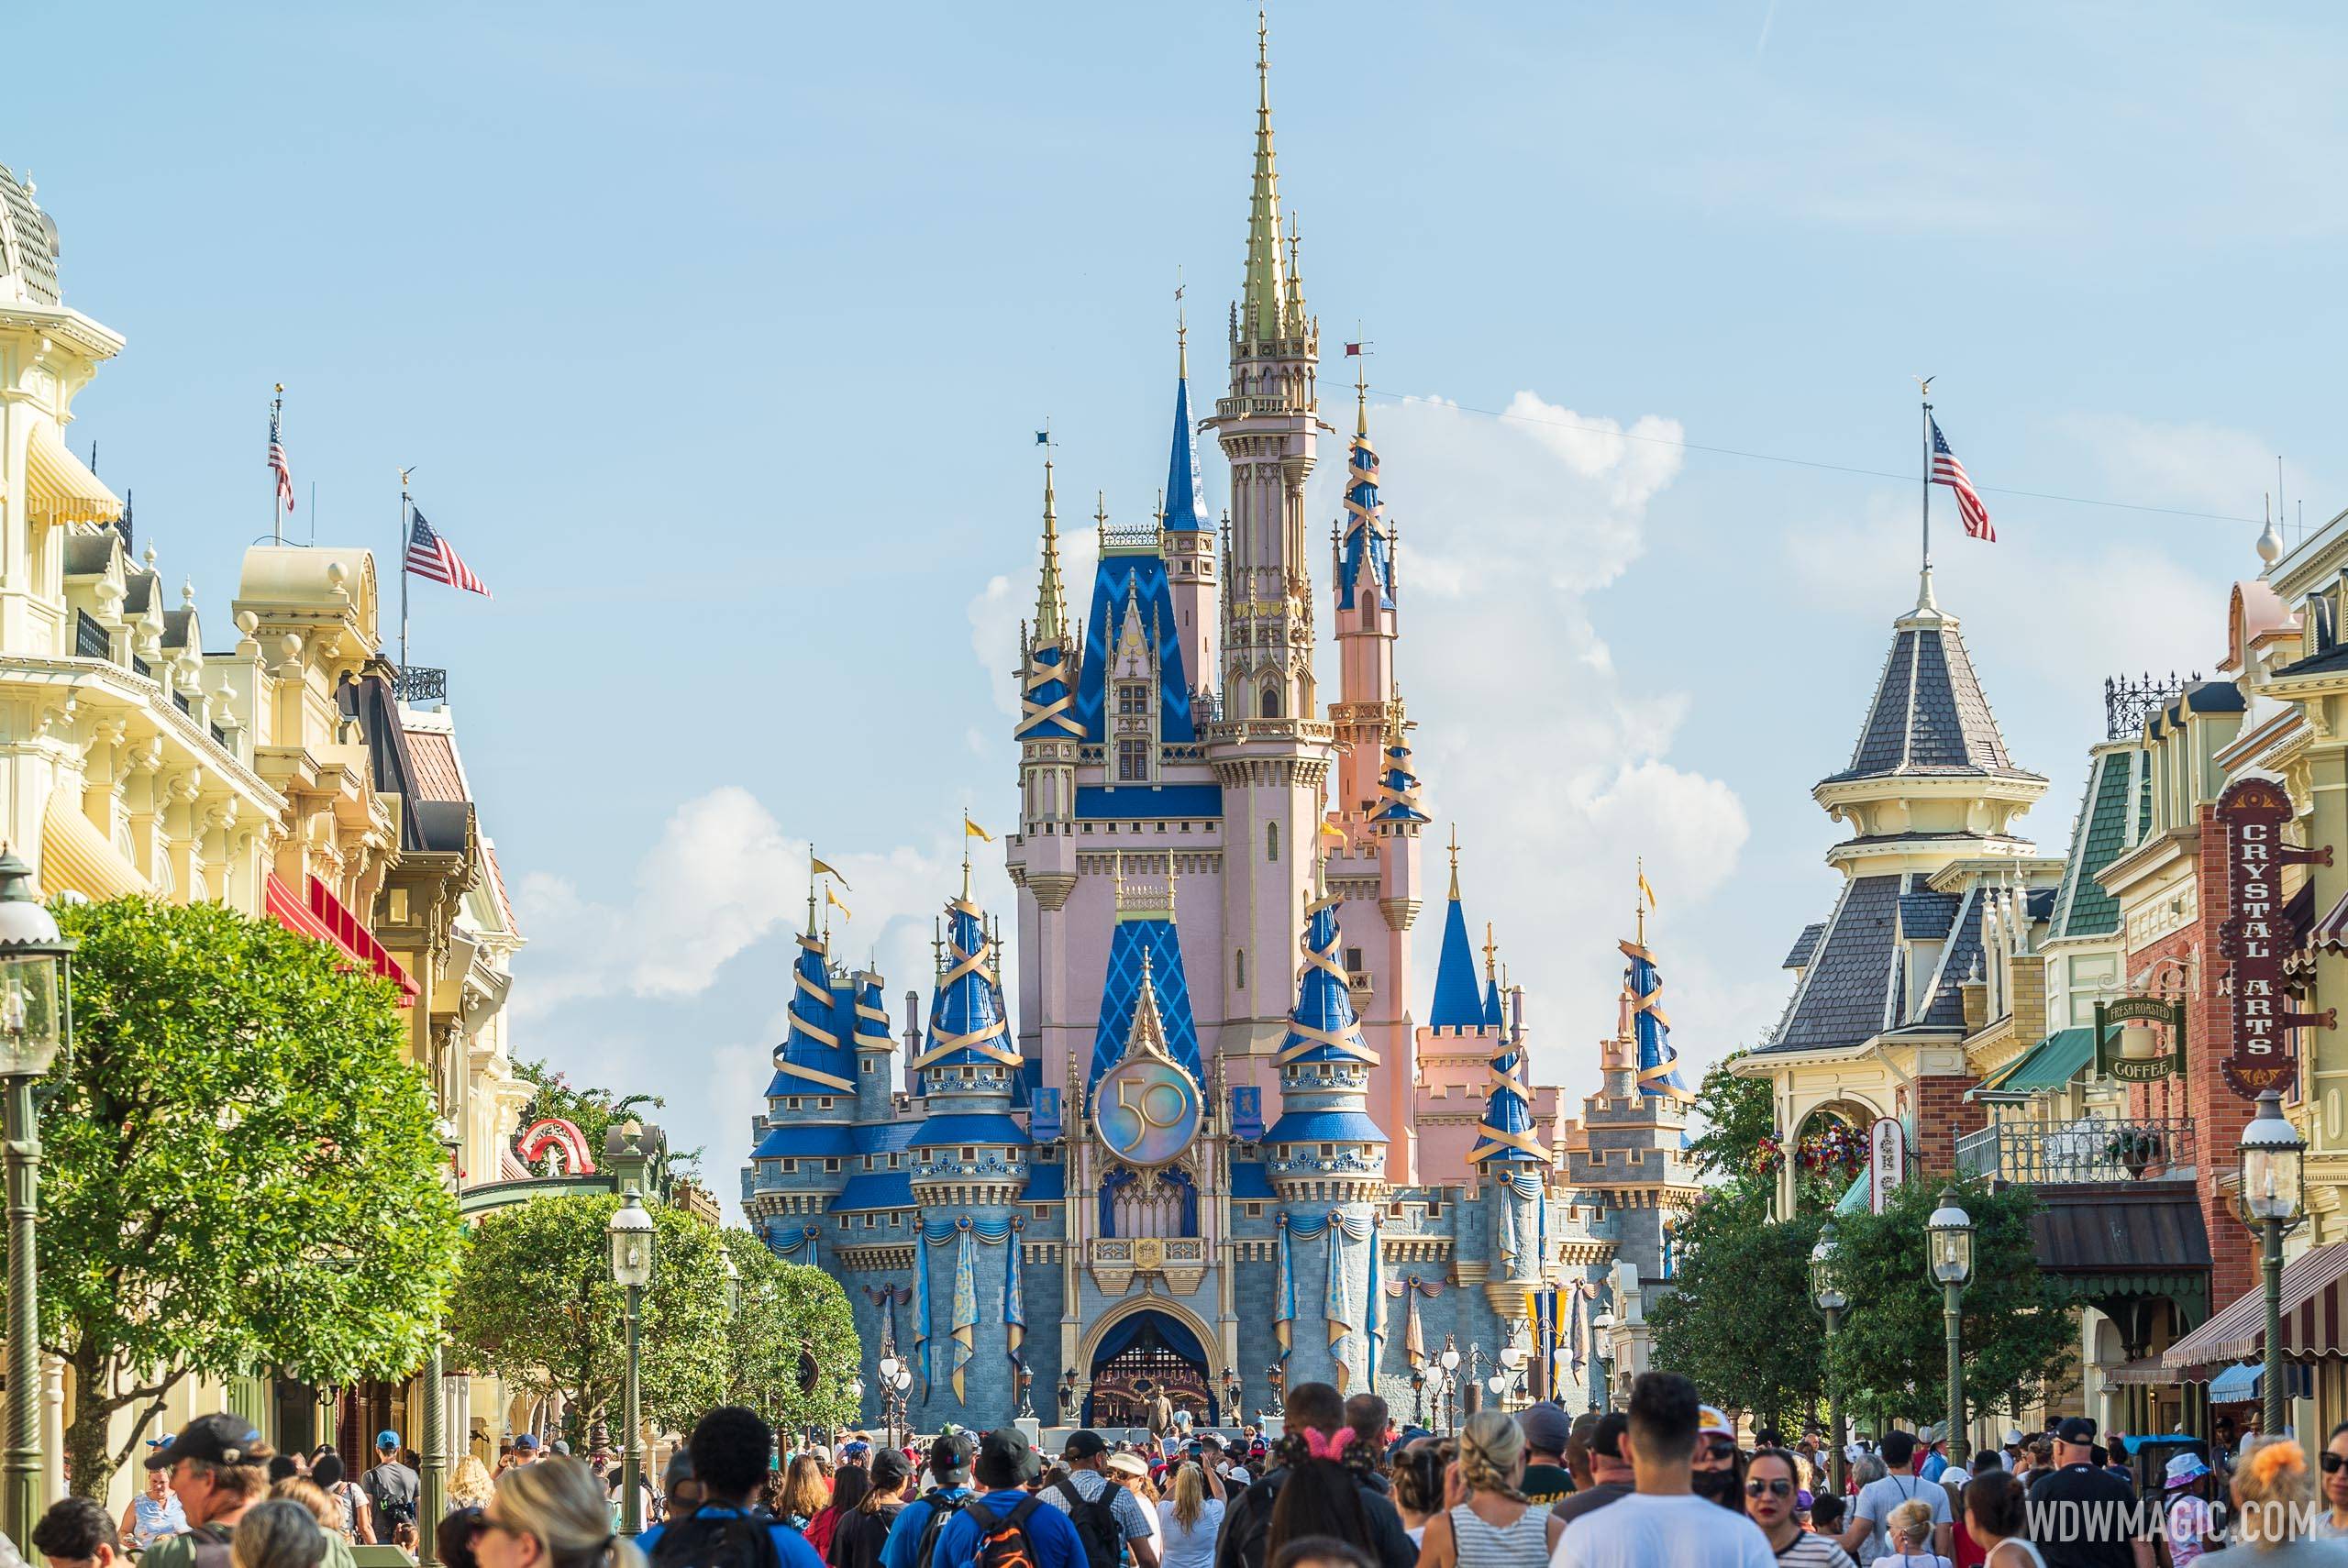 Magic Kingdom will likely close at 4:30pm on both dates